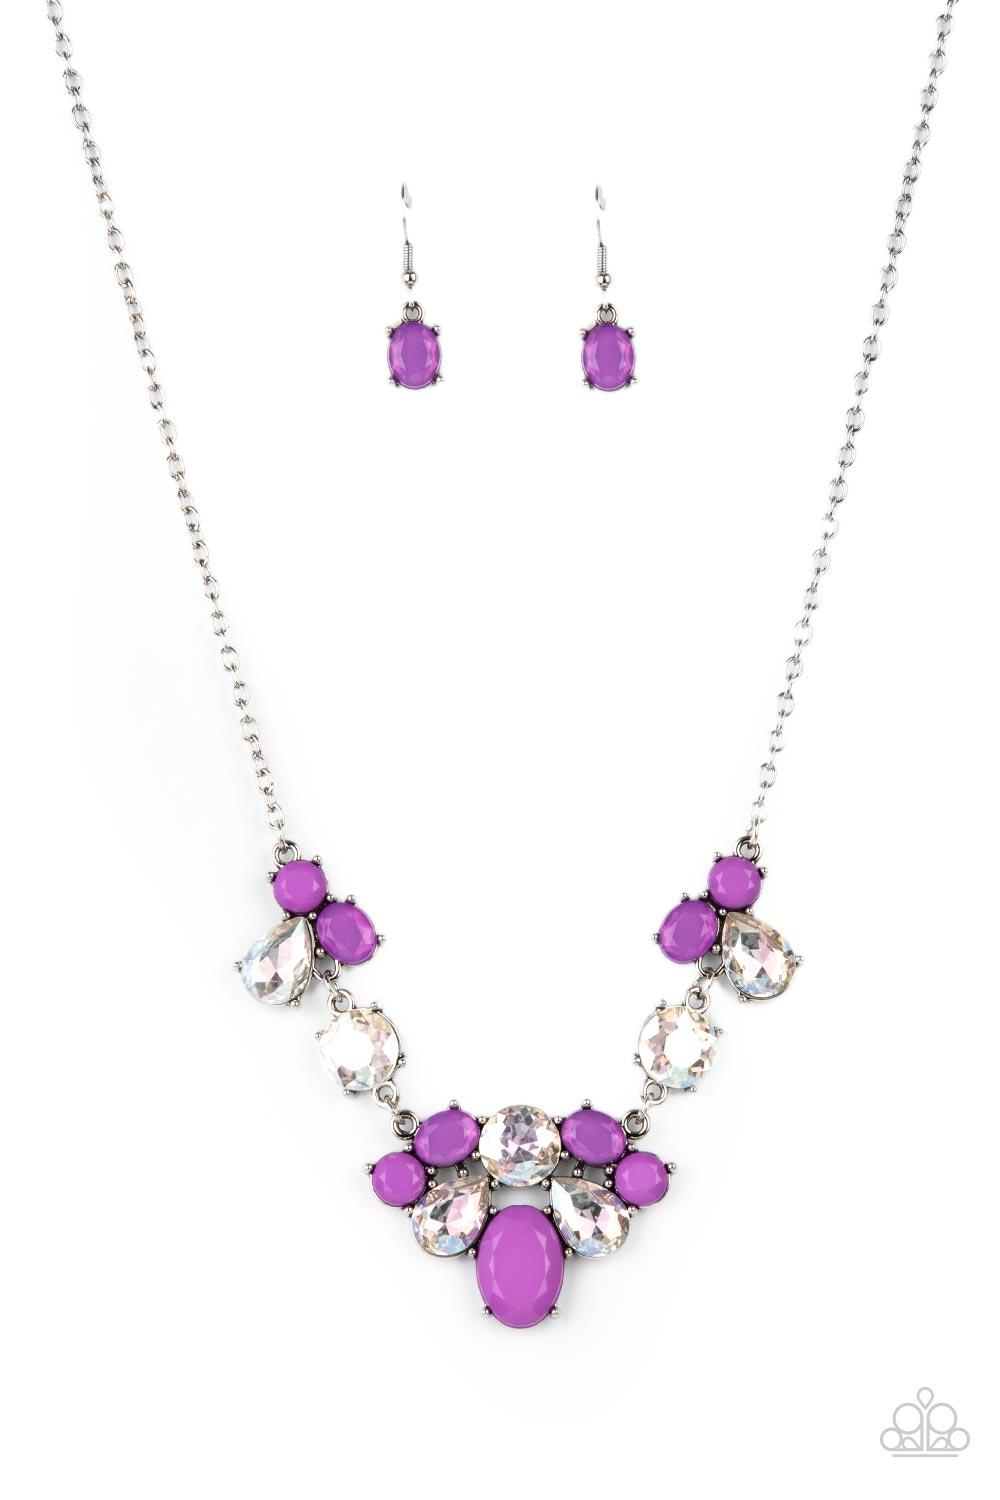 five-dollar-jewelry-ethereal-romance-purple-necklace-paparazzi-accessories